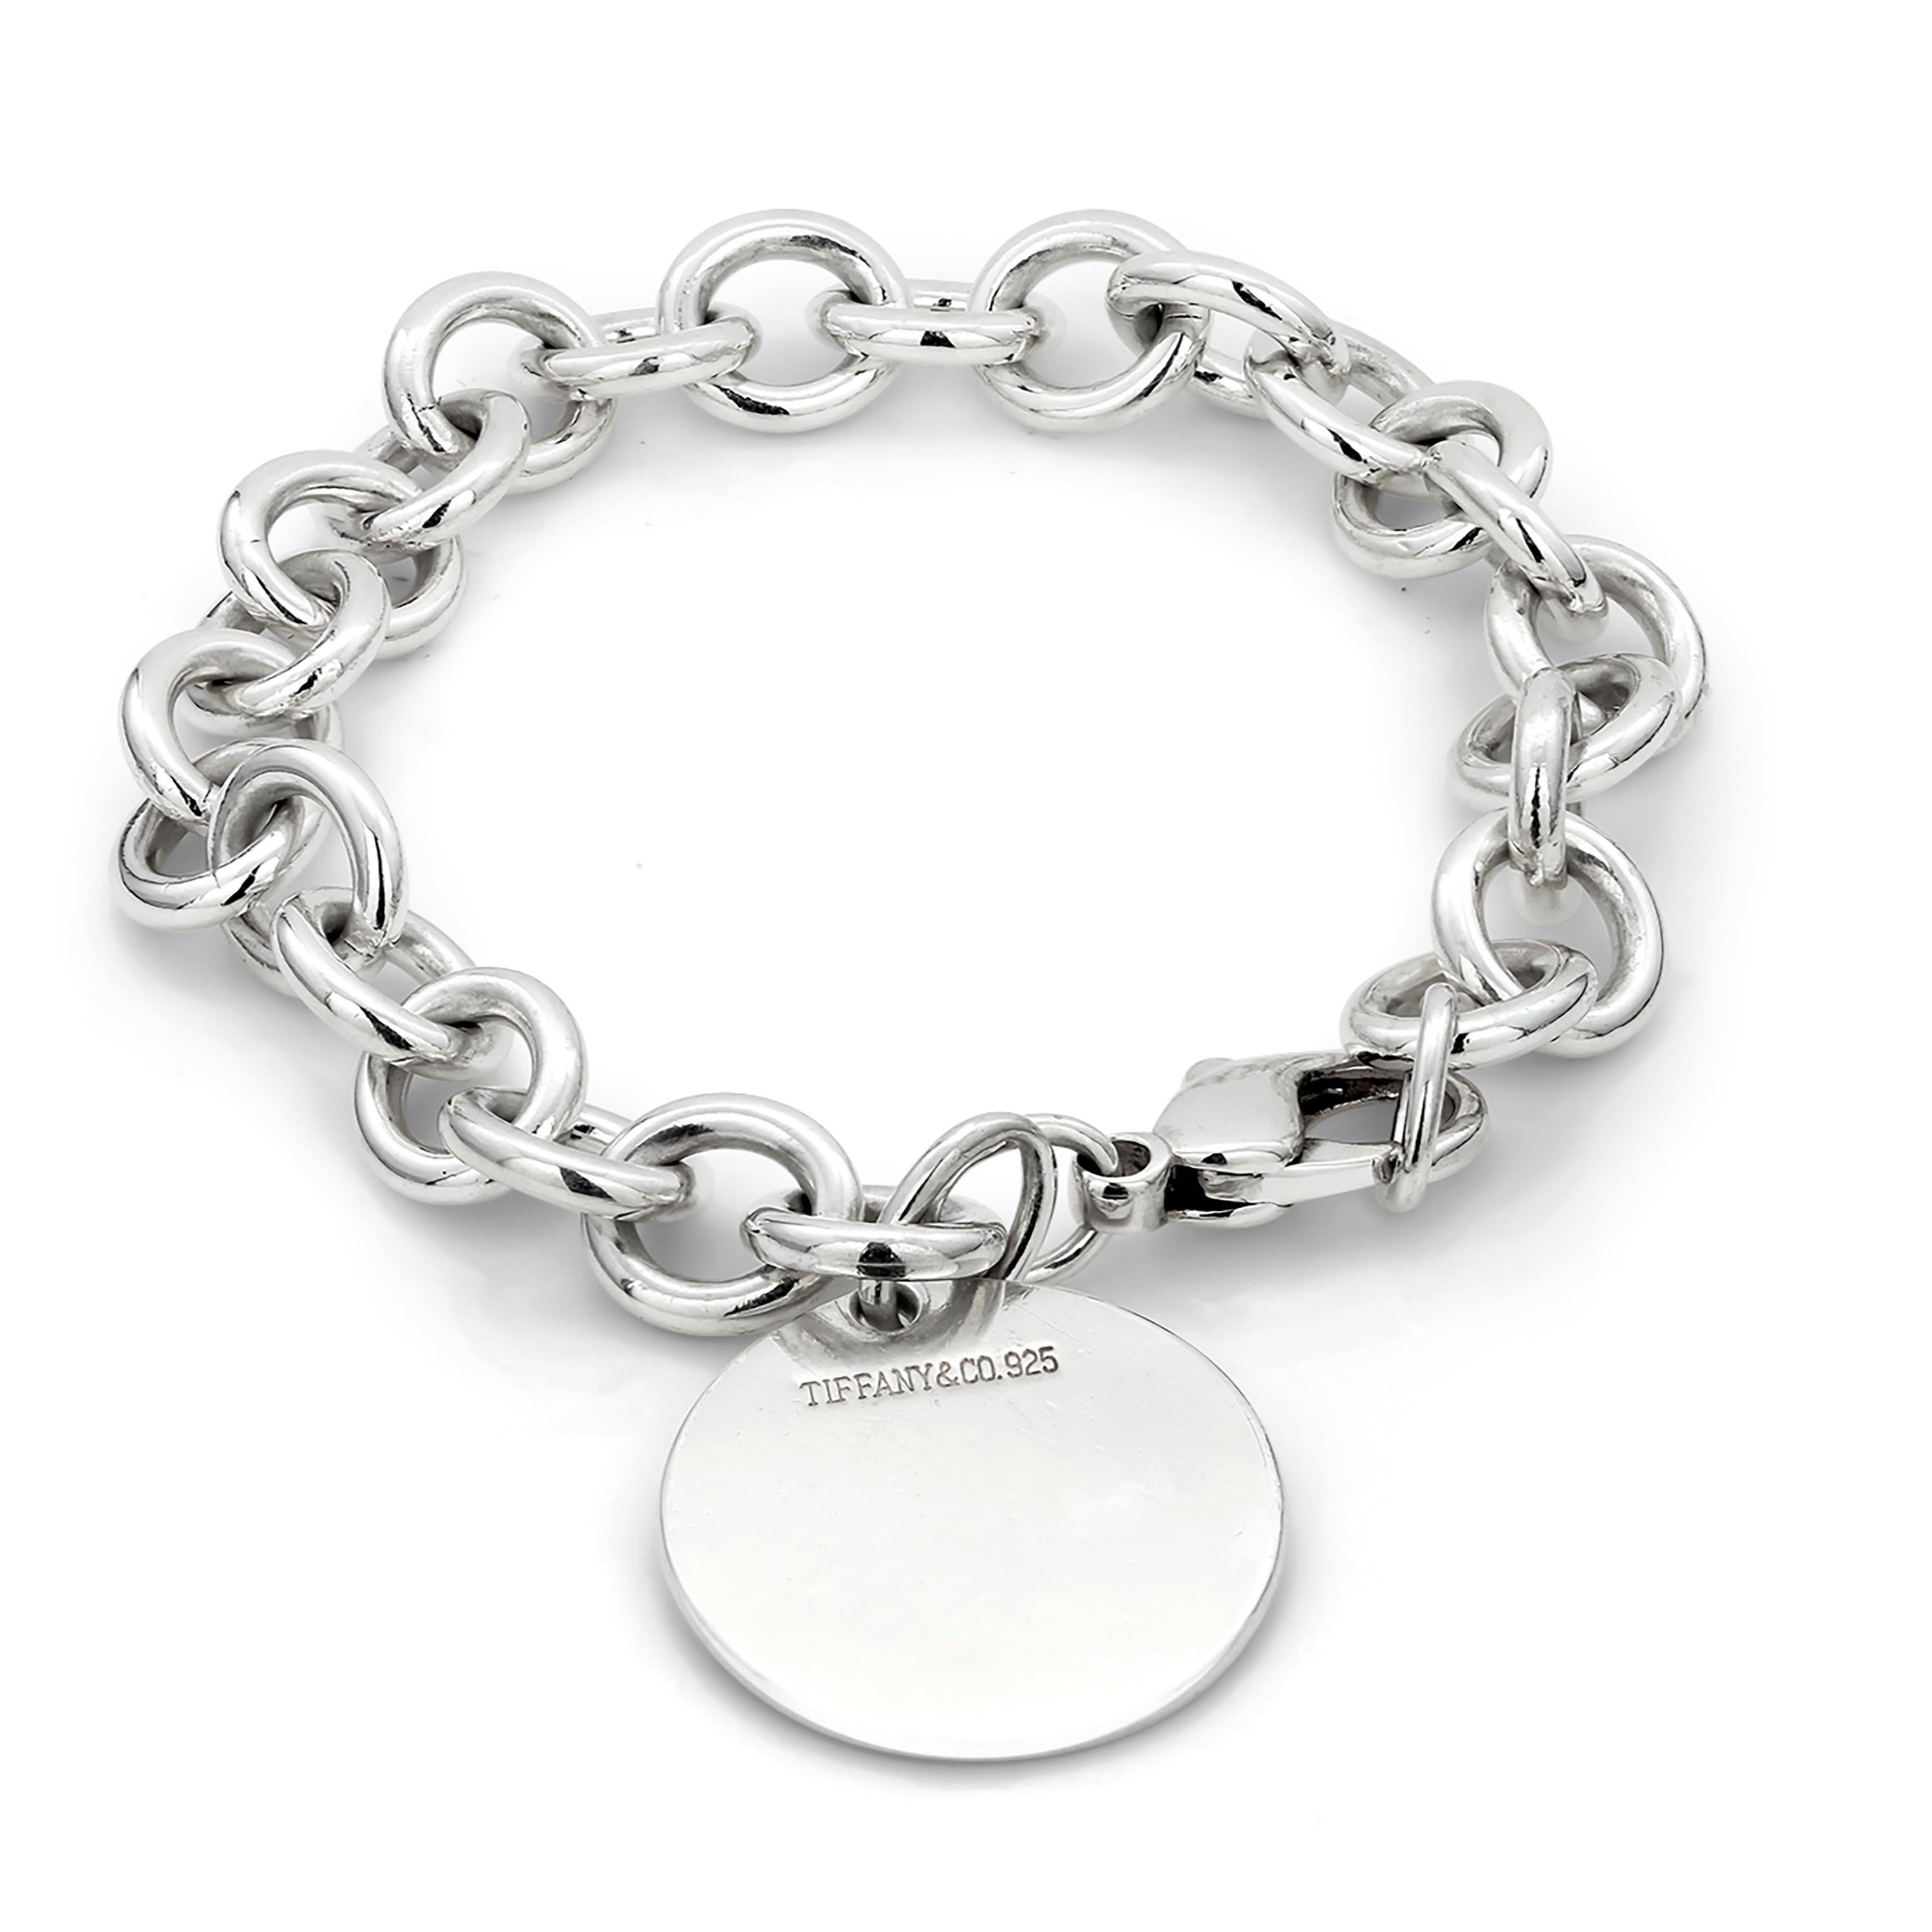 Contemporary Tiffany and Co. Sterling Silver Link Bracelet with Monogrammed Charm